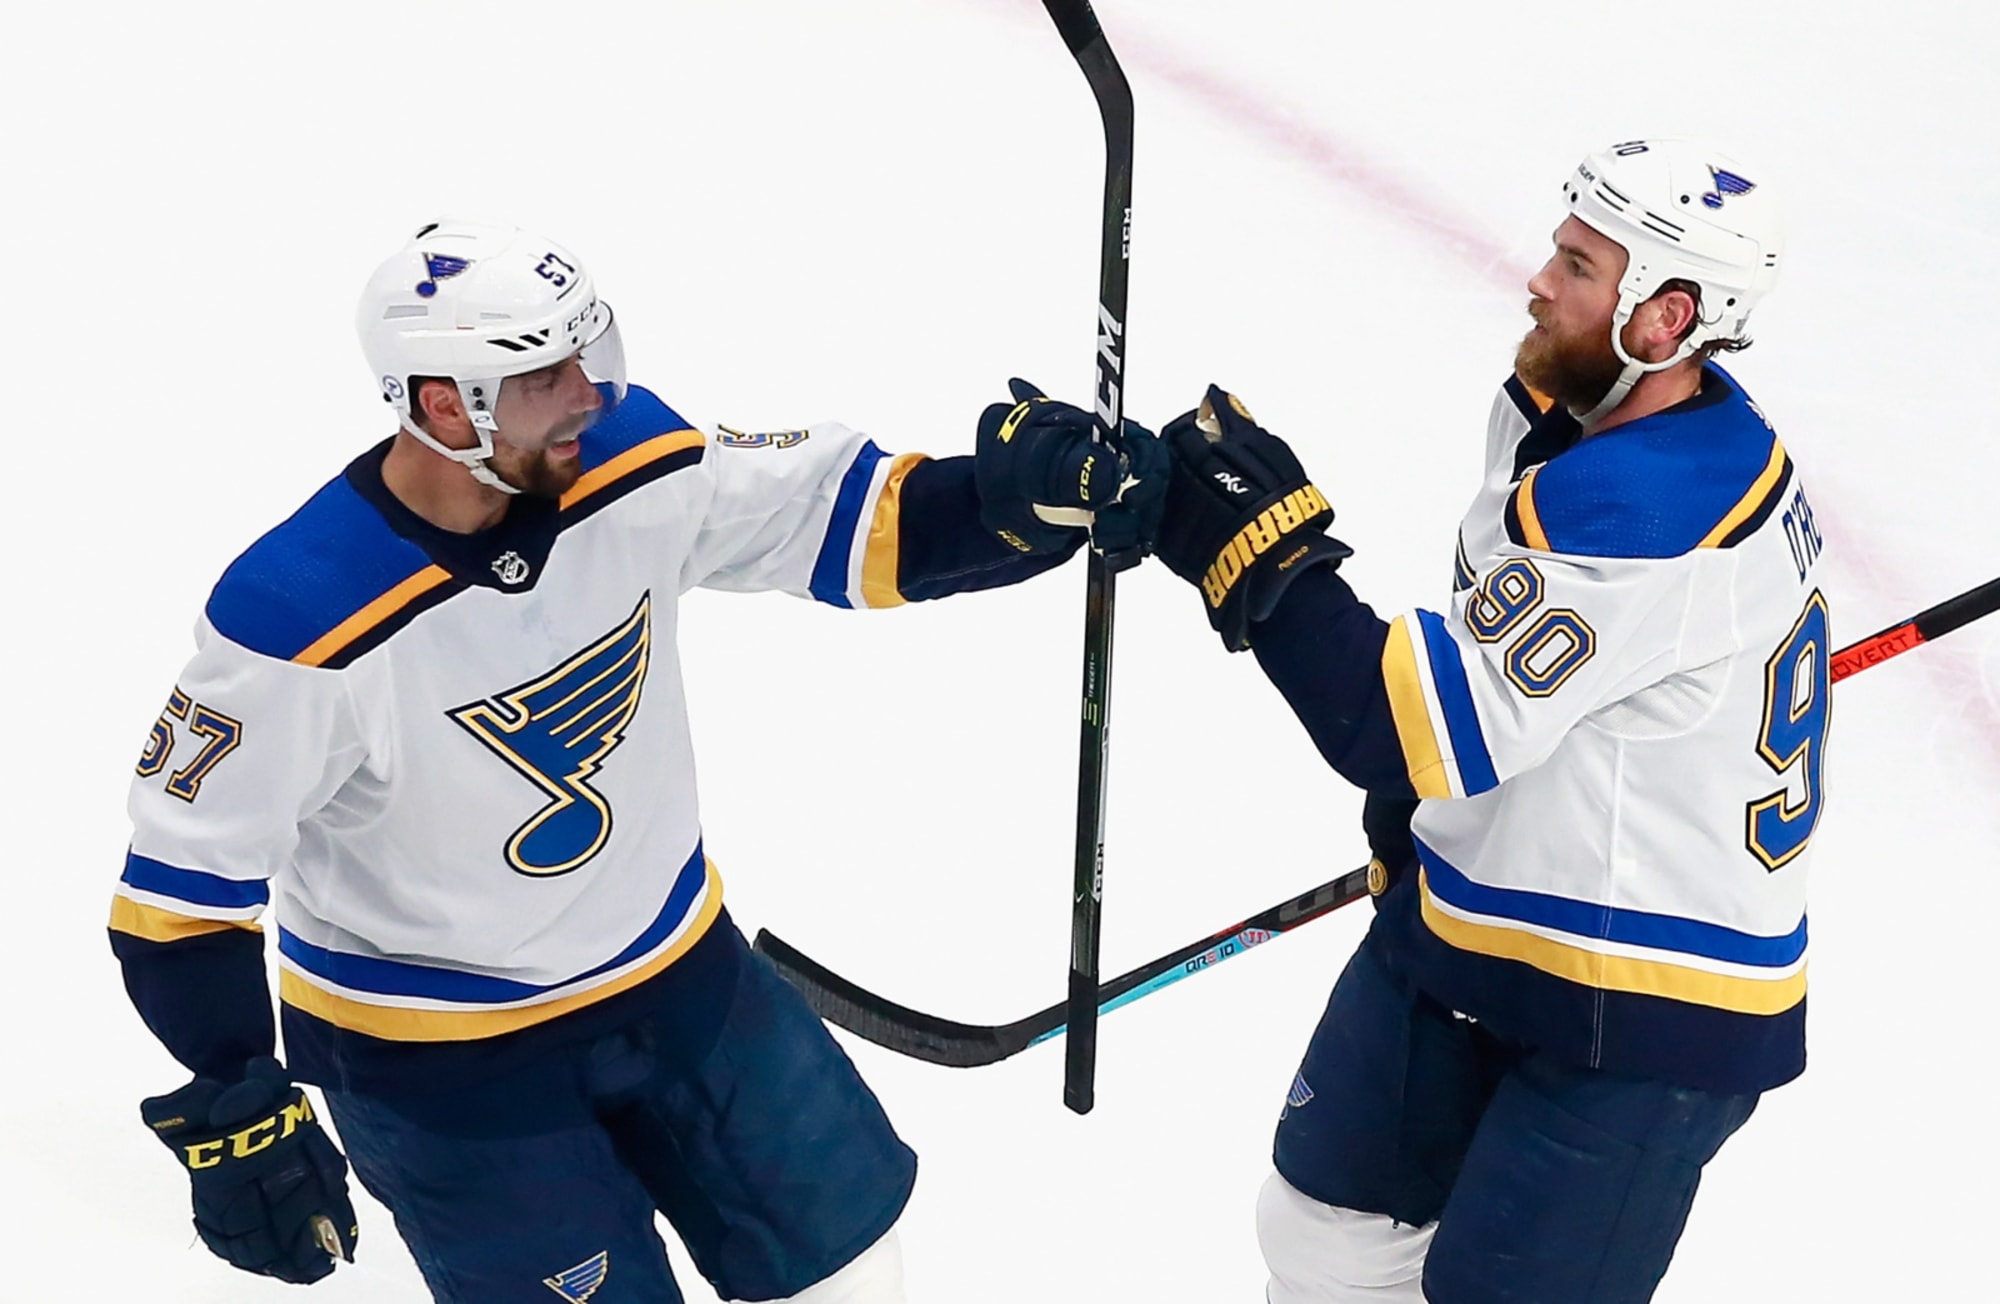 Ryan O’Reilly leads furious St. Louis Blues attack to even series at 2.